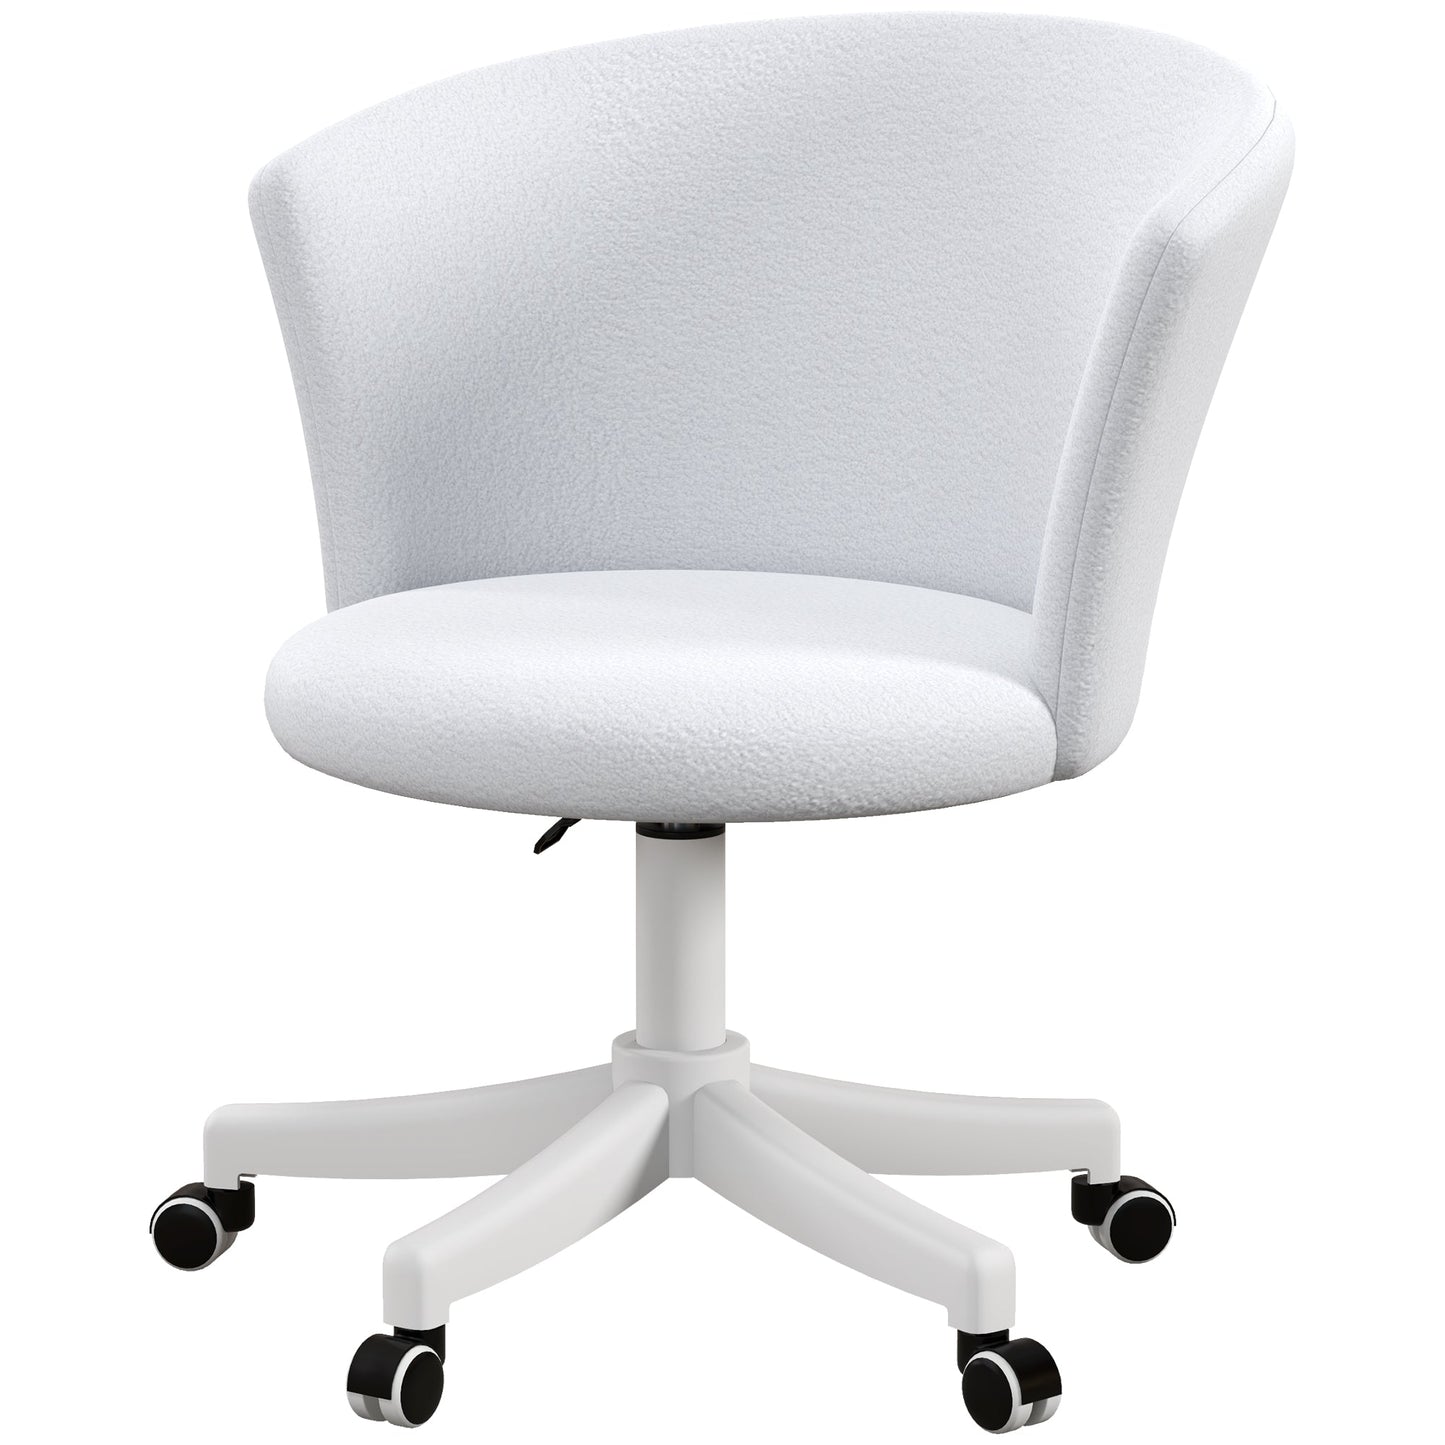 Armless Office Chair, Fluffy Computer Desk Chair with Adjustable Height, Swivel Wheels, Mid Back, White - Gallery Canada